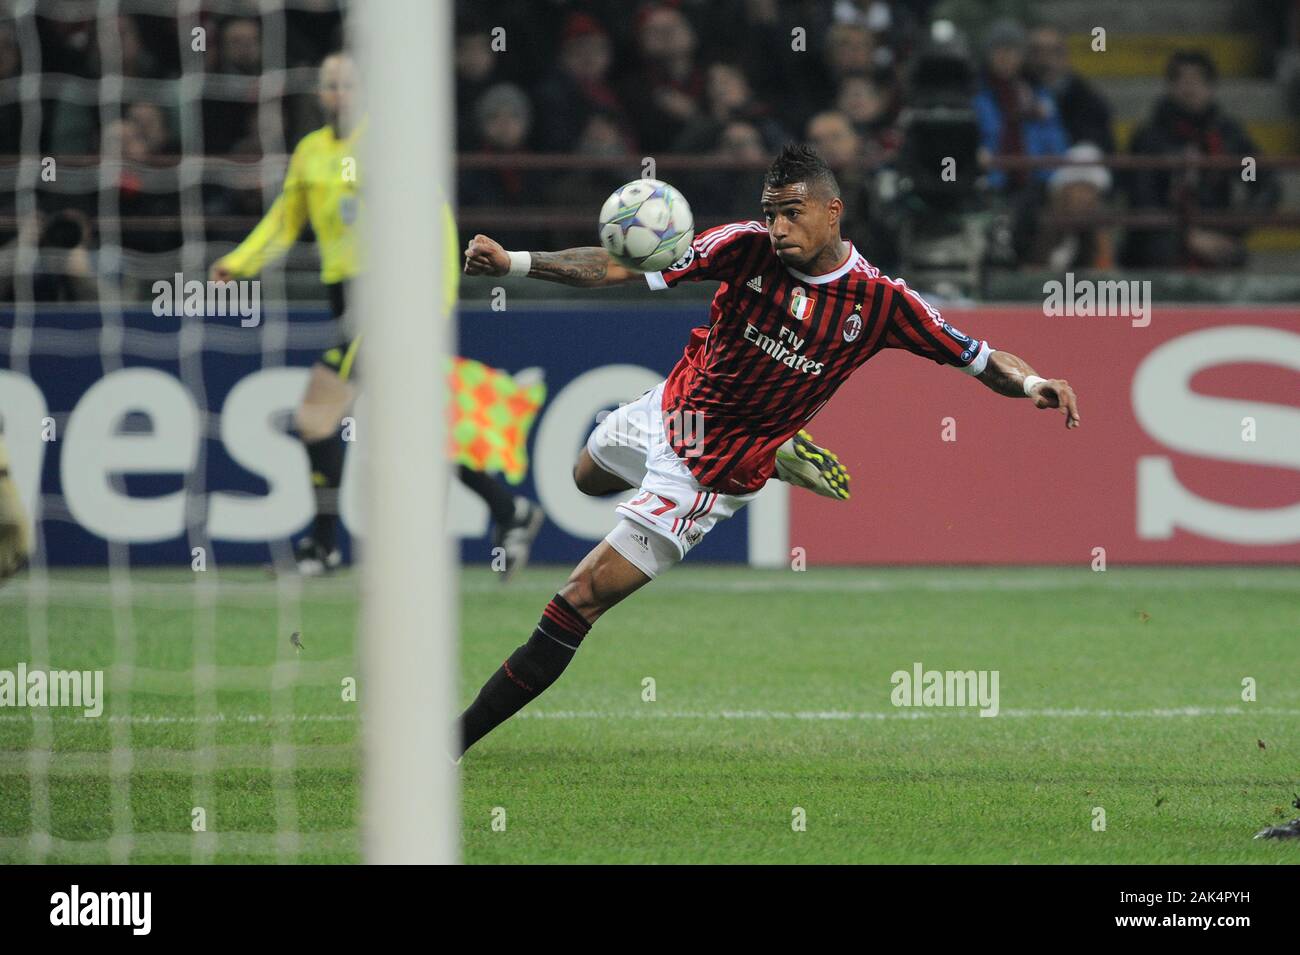 Milan Italy ,23 NOVEMBER 2011, 'G.Meazza  San Siro' Stadium, UEFA Champions League 2011/2012, AC Milan - FC Barcelona: Kevin Prince Boateng in action during the match Stock Photo